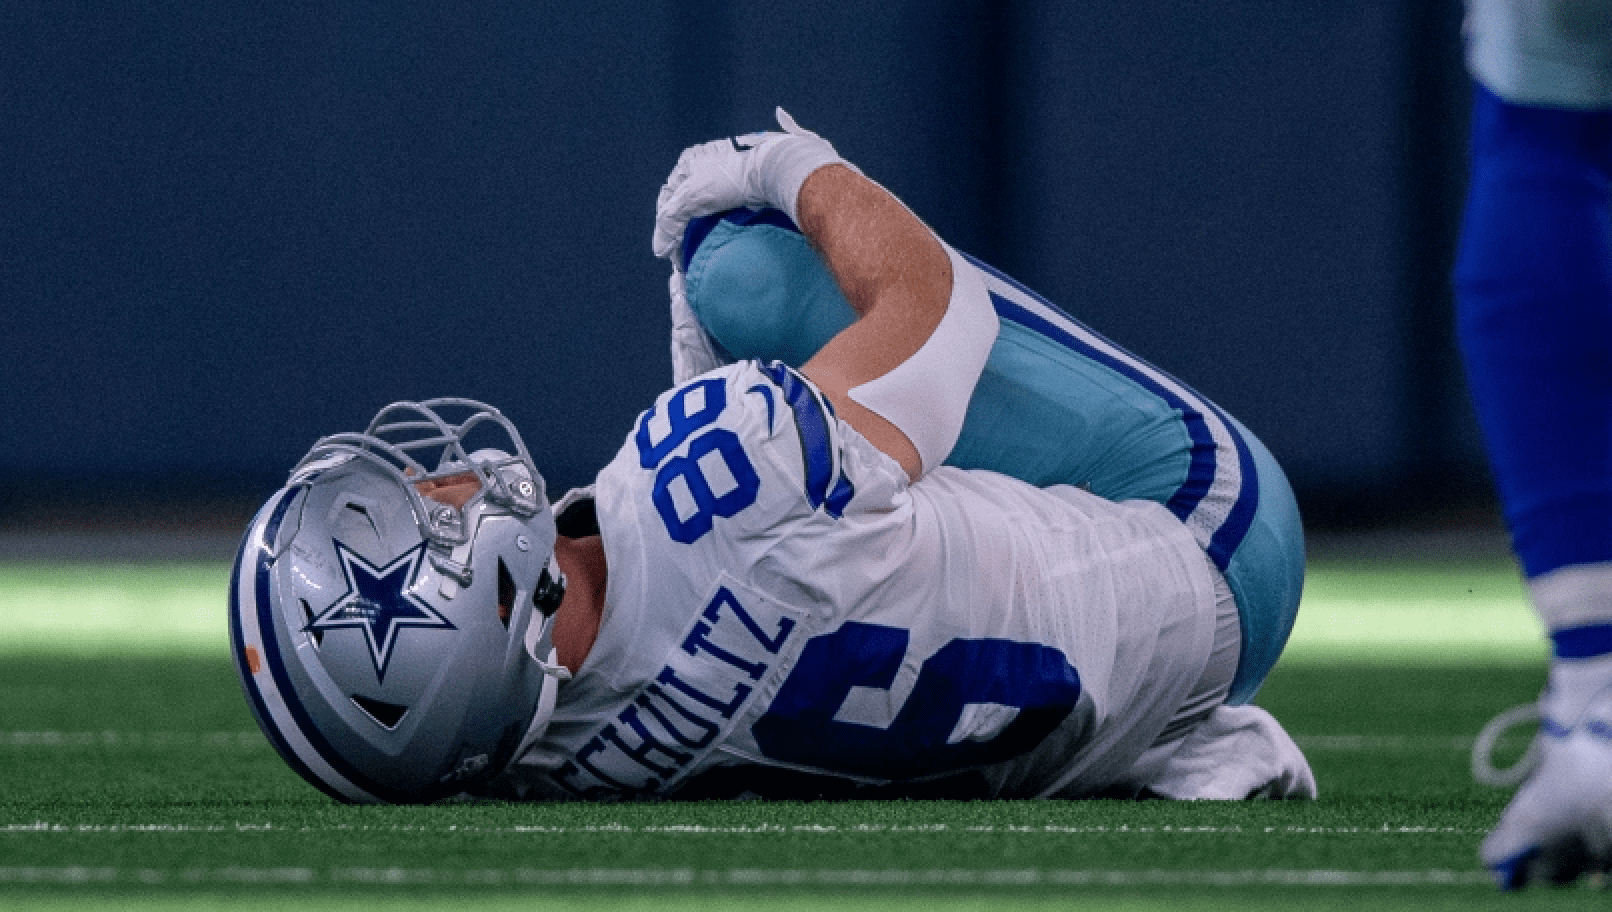 Fantasy Football Injury News: Dalton Schultz injury update, should Cowboys fans be worried about his knee?